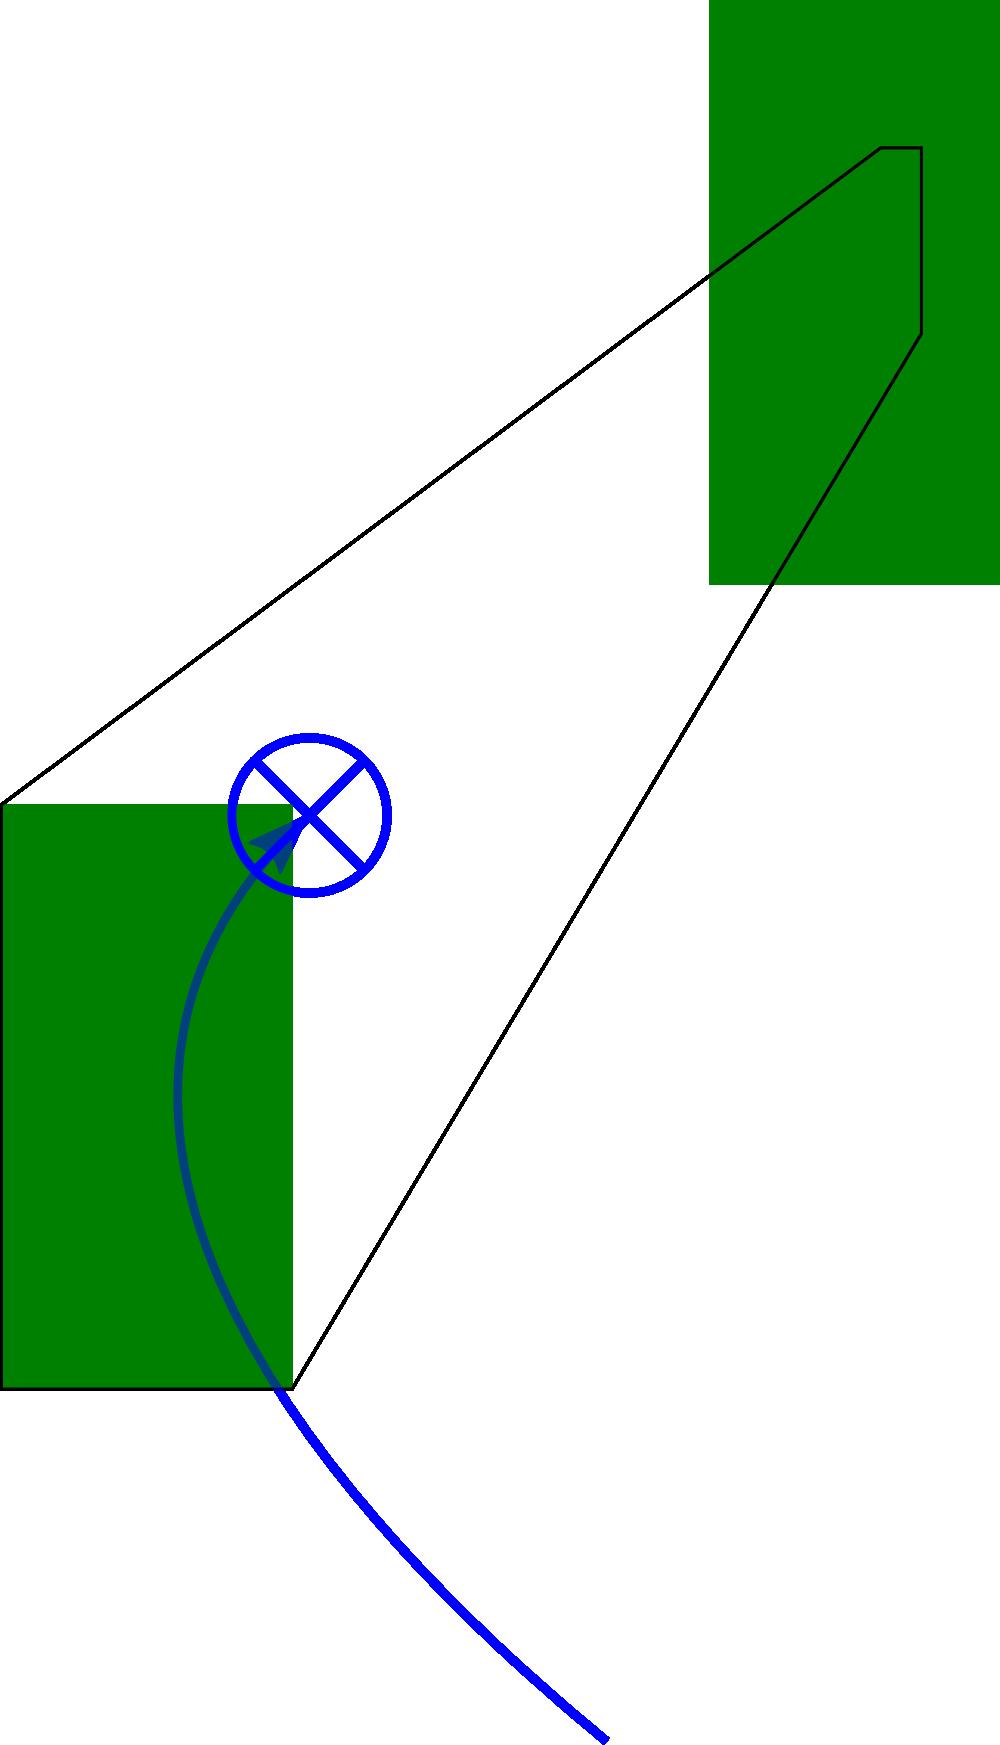 The left figures show the ICP trajectories with the final ICP at the end of the step, on the right side the Atlas robot can be seen right after taking a step that corresponds to the contact situation